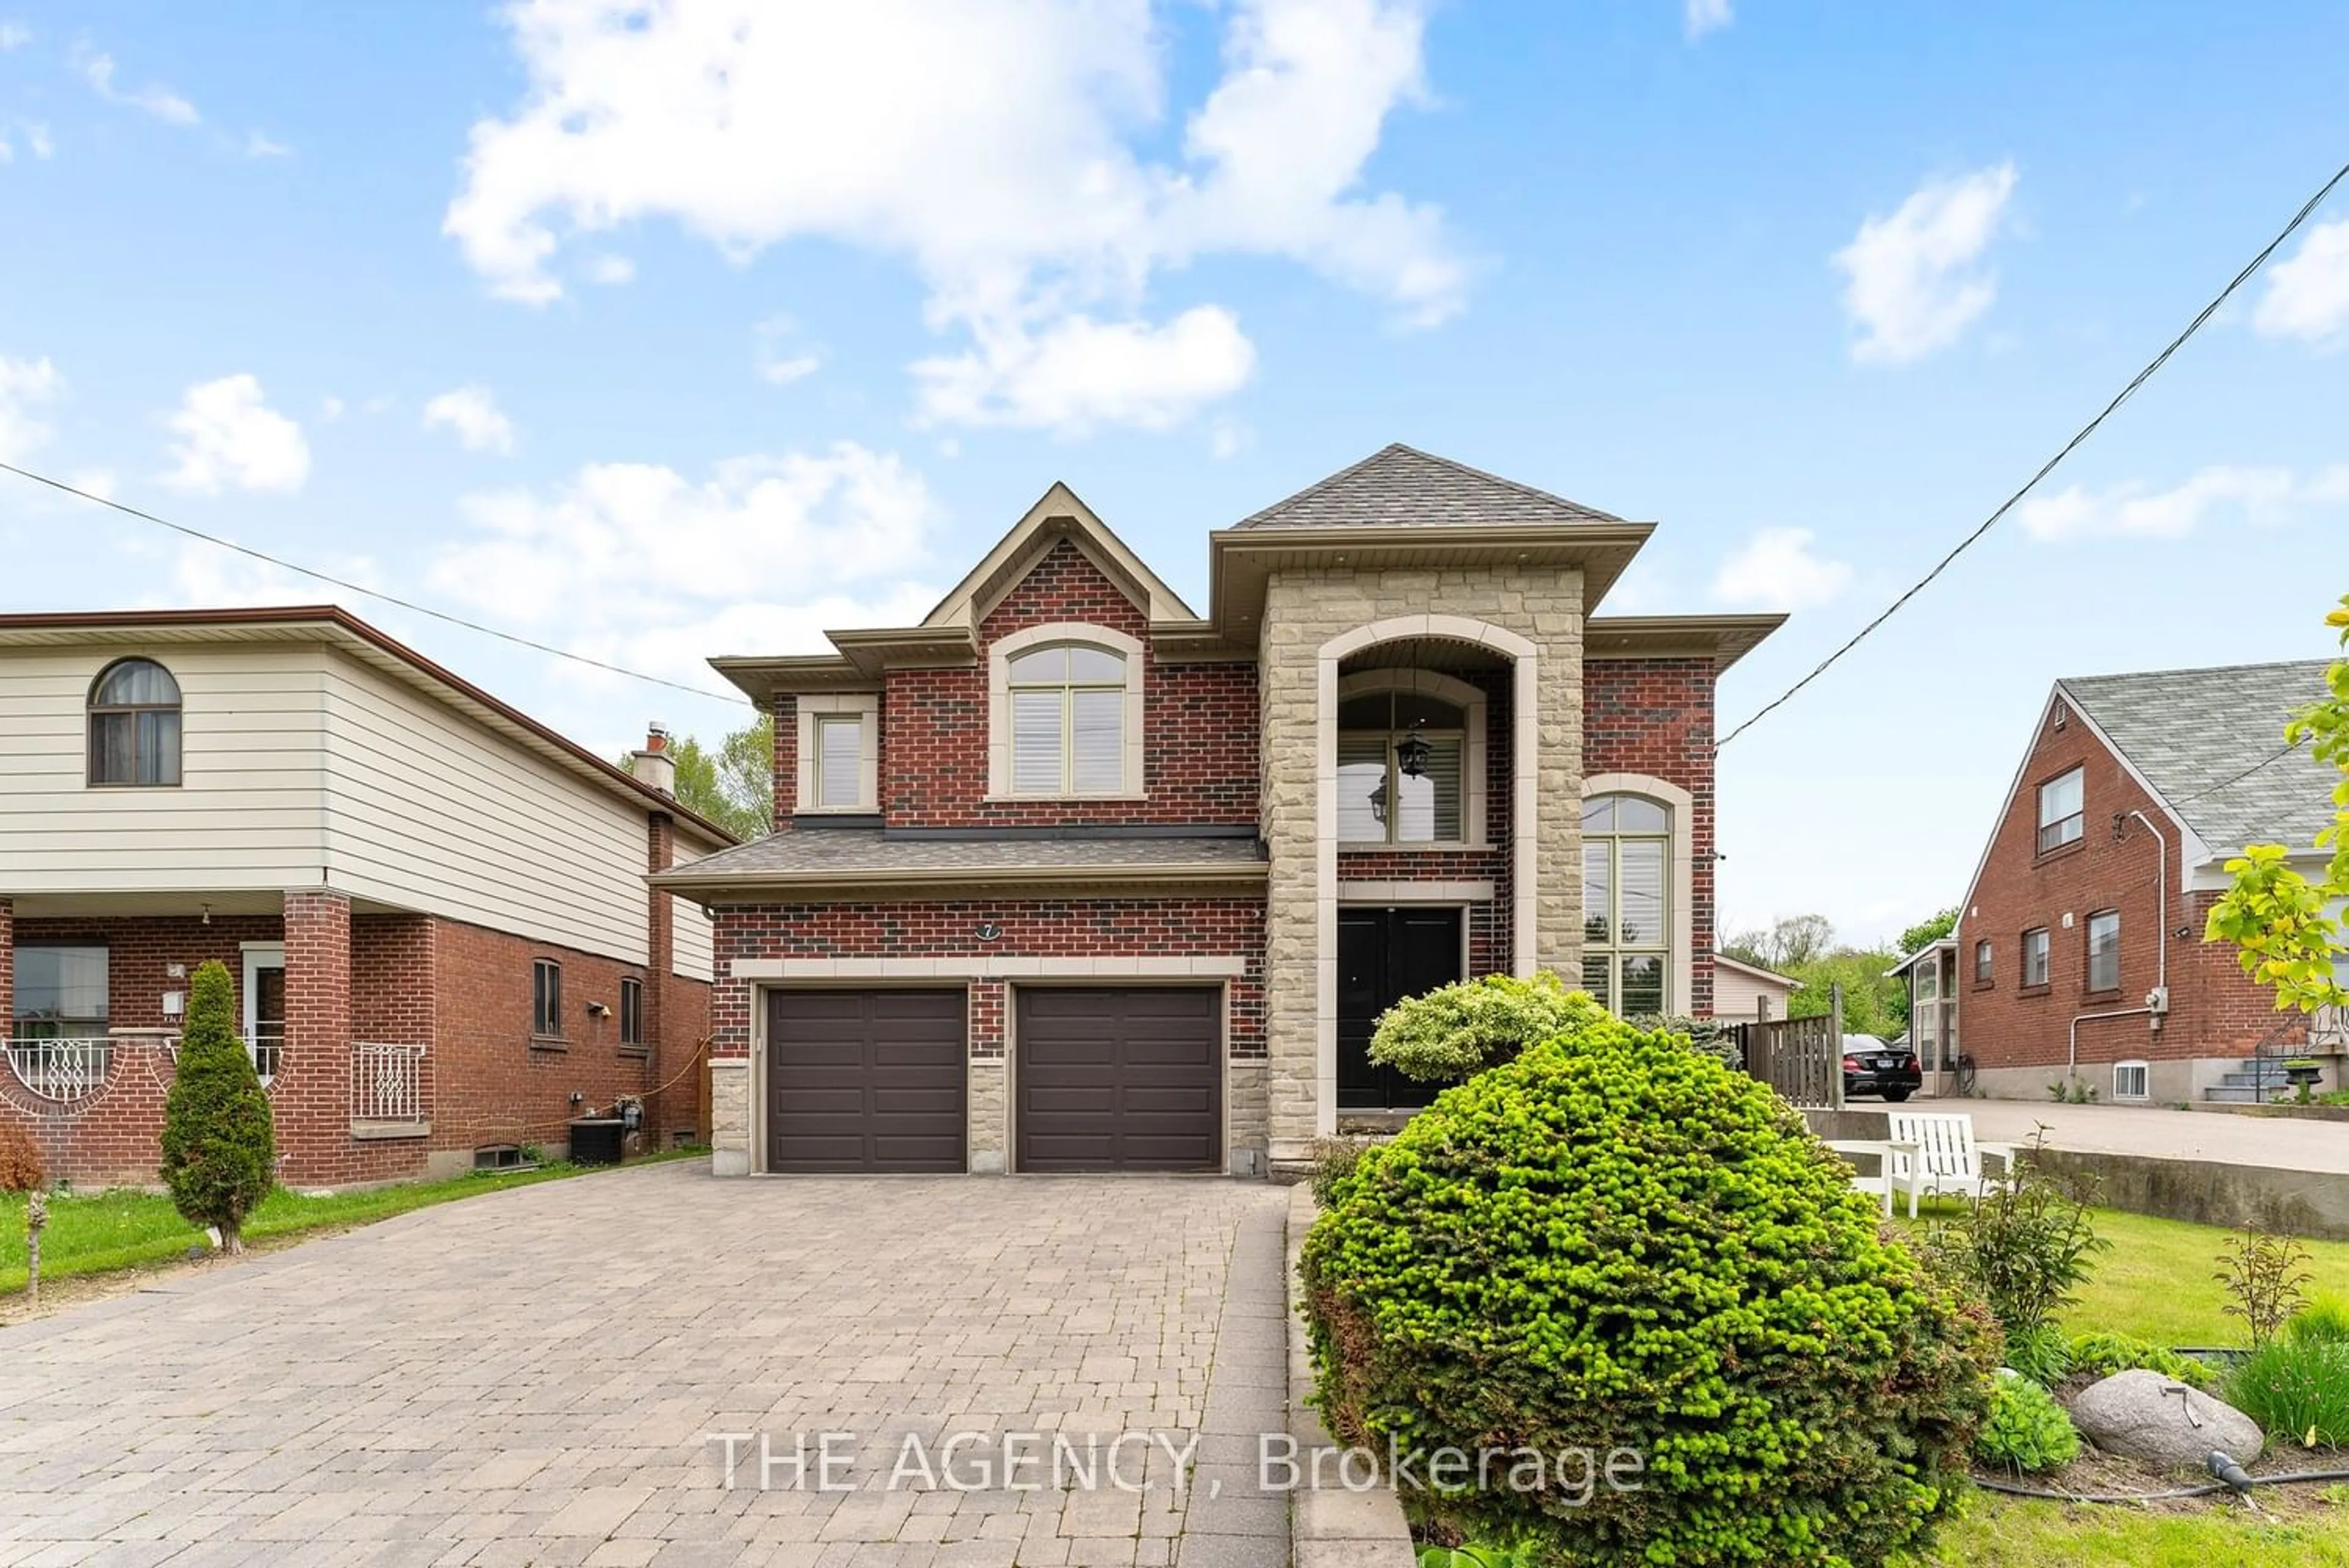 Home with brick exterior material for 7 Compton Cres, Toronto Ontario M3M 2C3